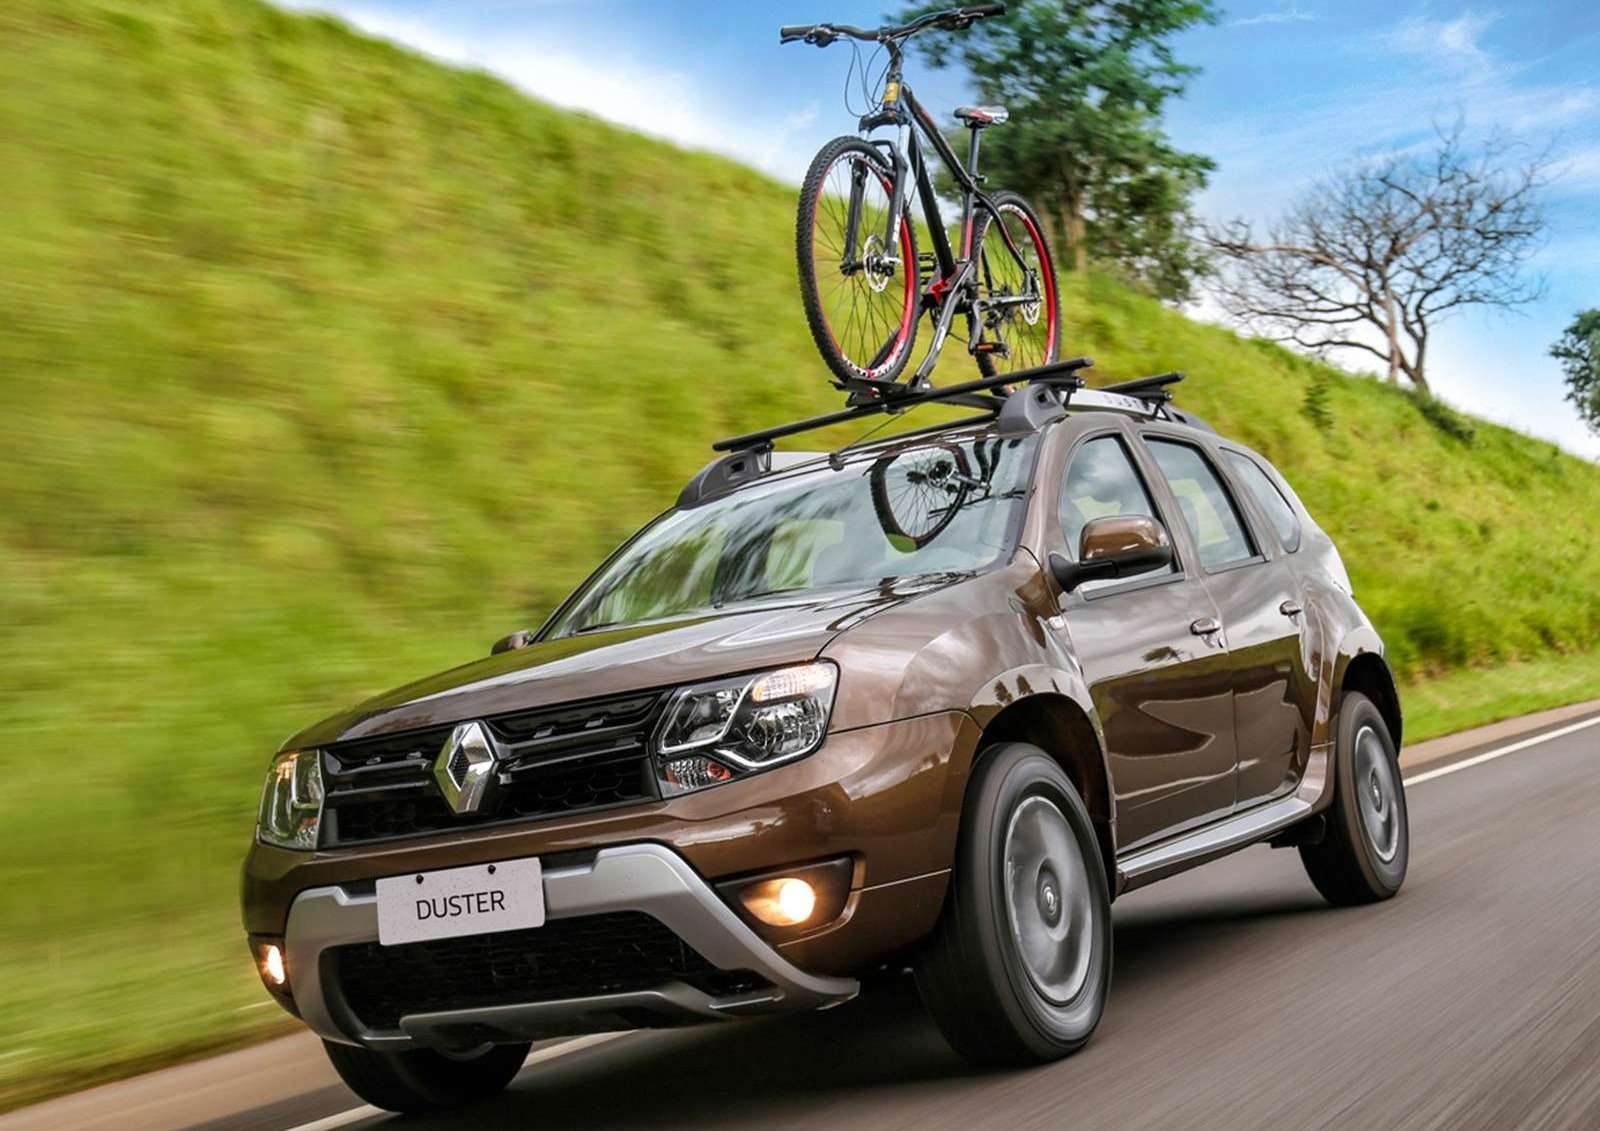 2016-renault-duster-launched-with-new-look-better-economy-in-brazil-photo-gallery_8